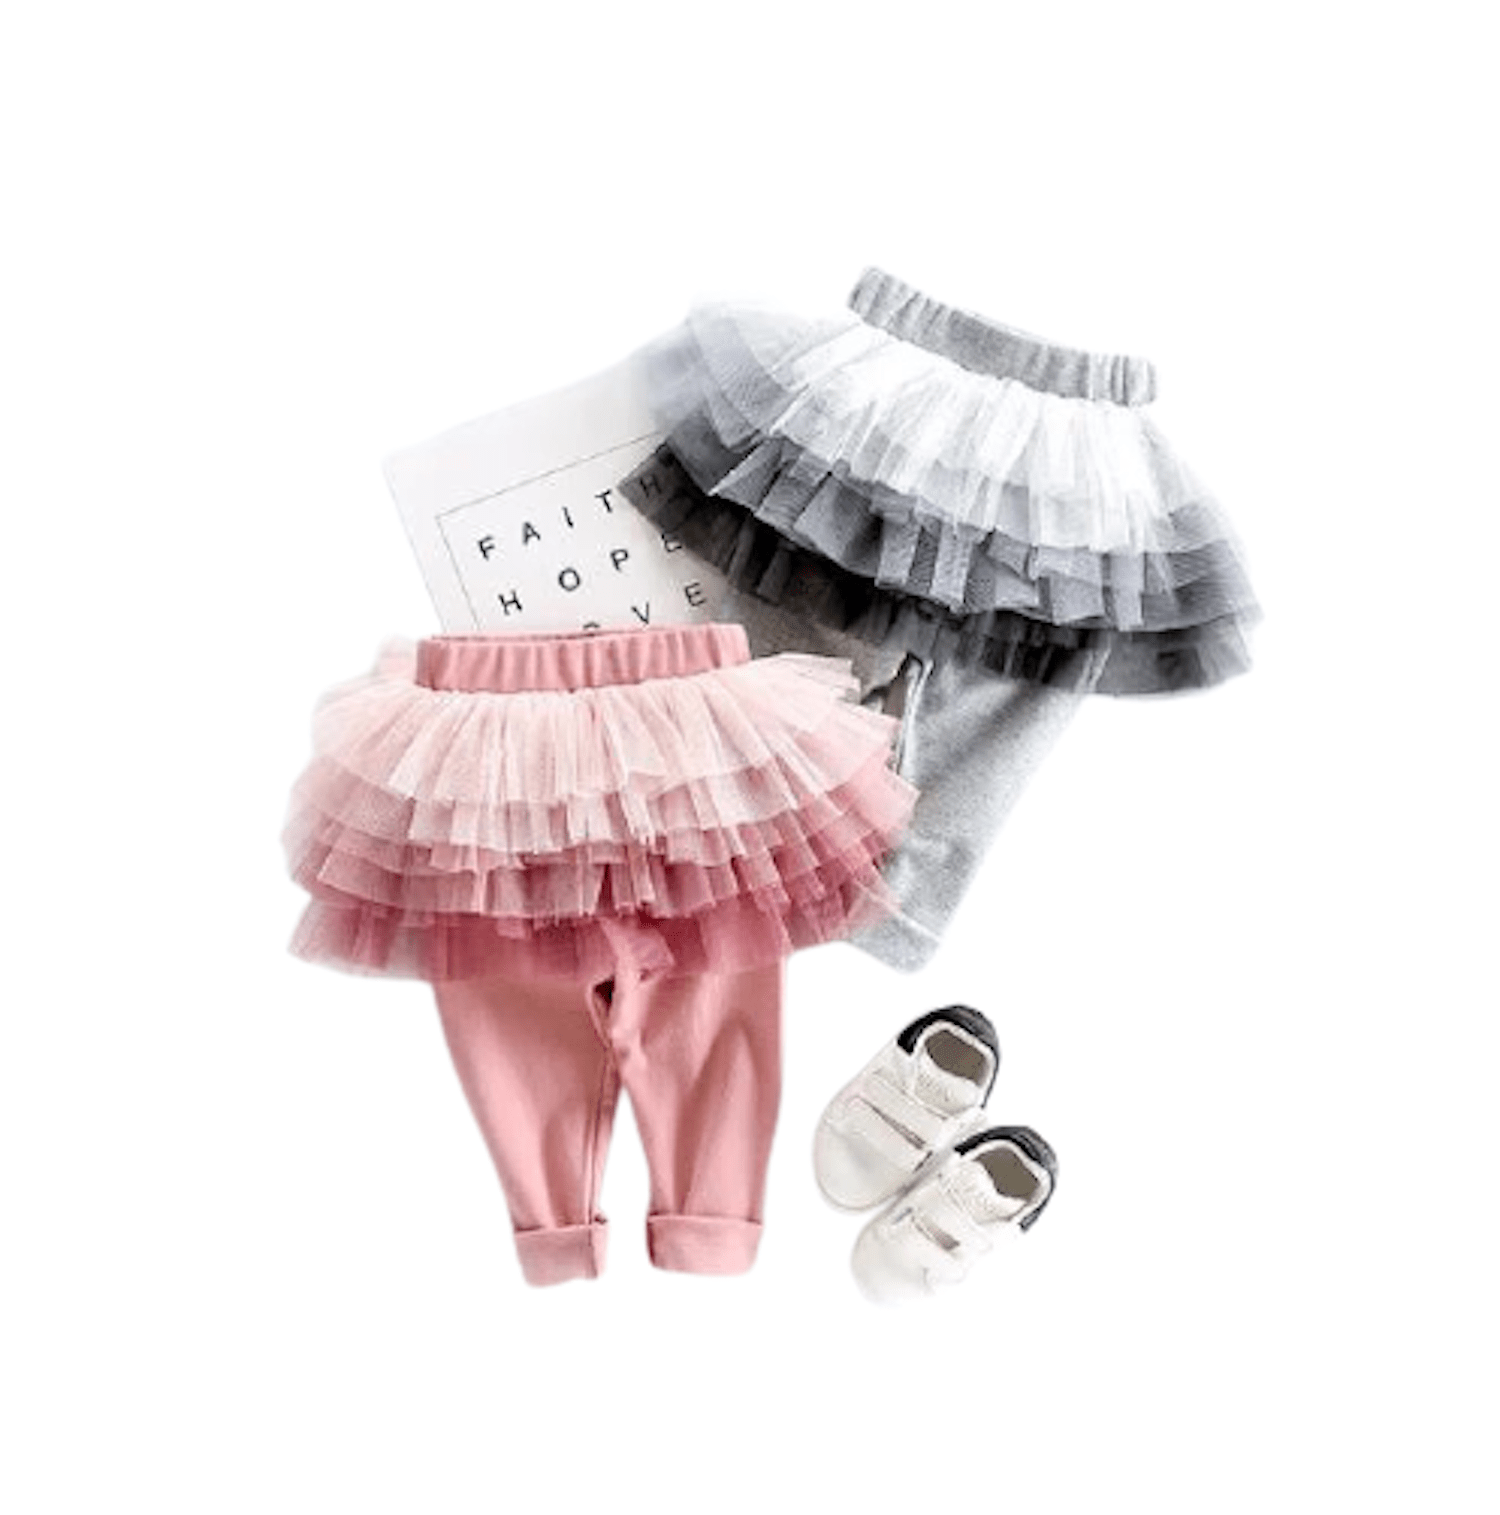 pink and gray tutu leggings set in one piece for kids of all ages by tutu joli, tutu leggings, pink kids leggings, gray kids leggings, baby leggings